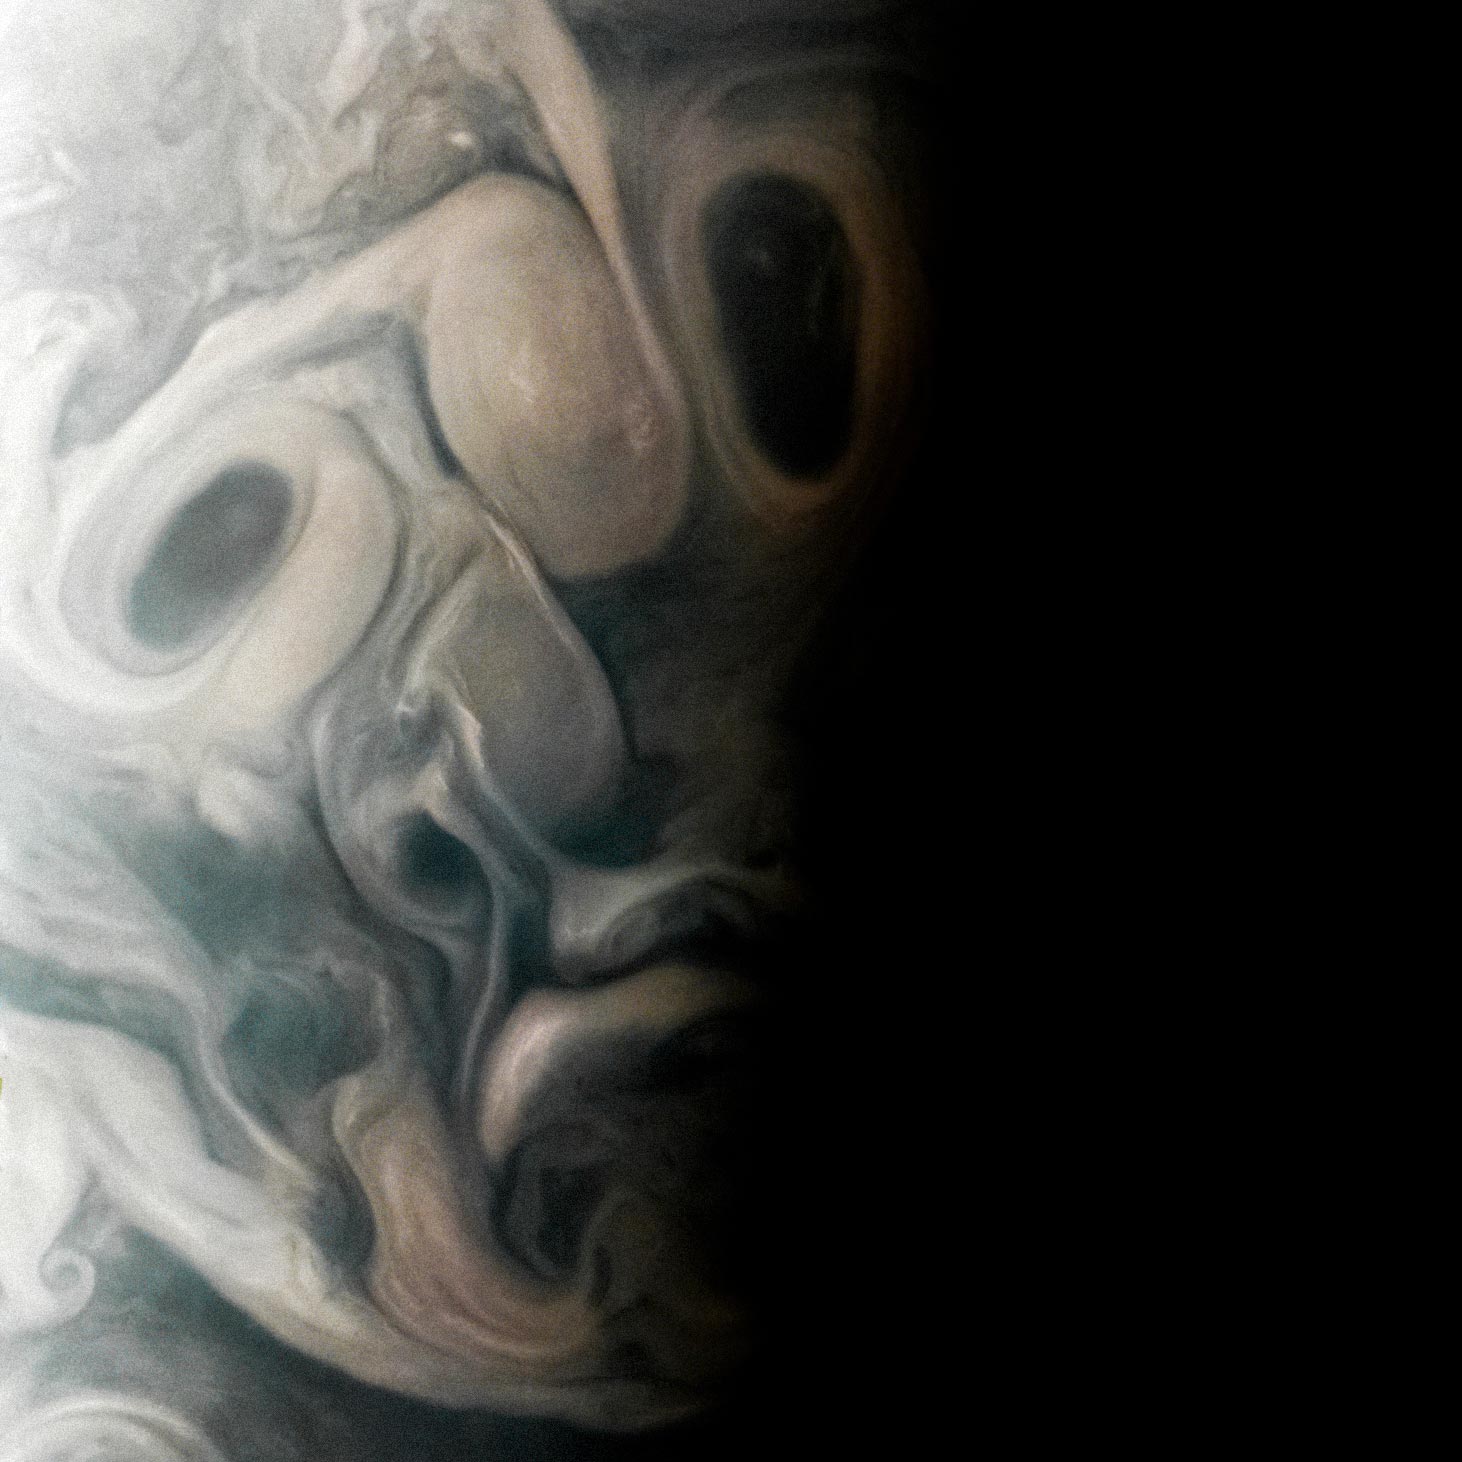 NASA’s Juno Mission Captures Stunning Image of Jupiter’s Jet N7 Region and Pareidolia in its Clouds